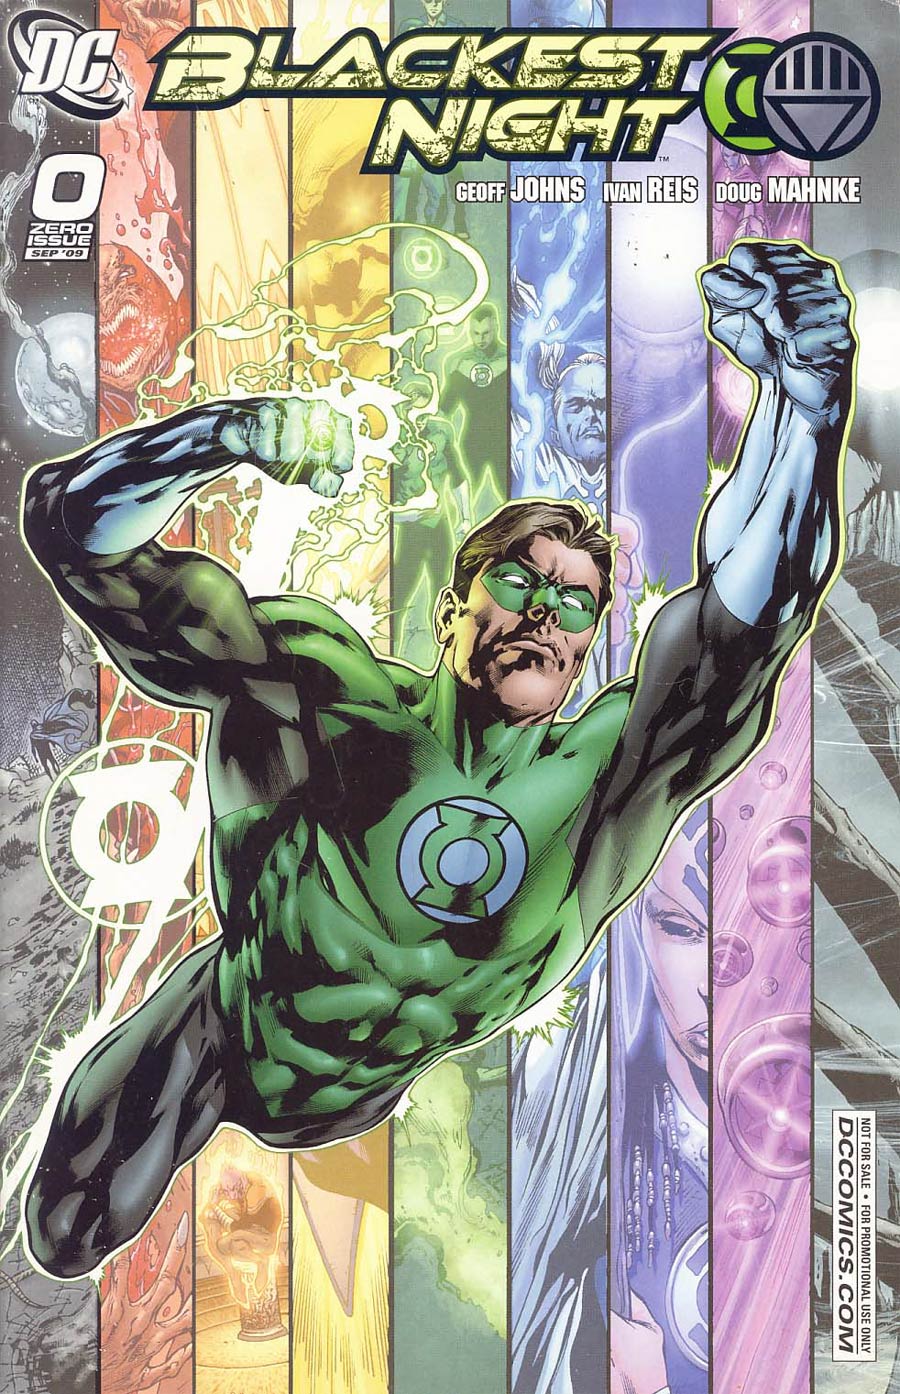 Blackest Night #0 Cover B SDCC 2009 Promotional Giveaway Edition